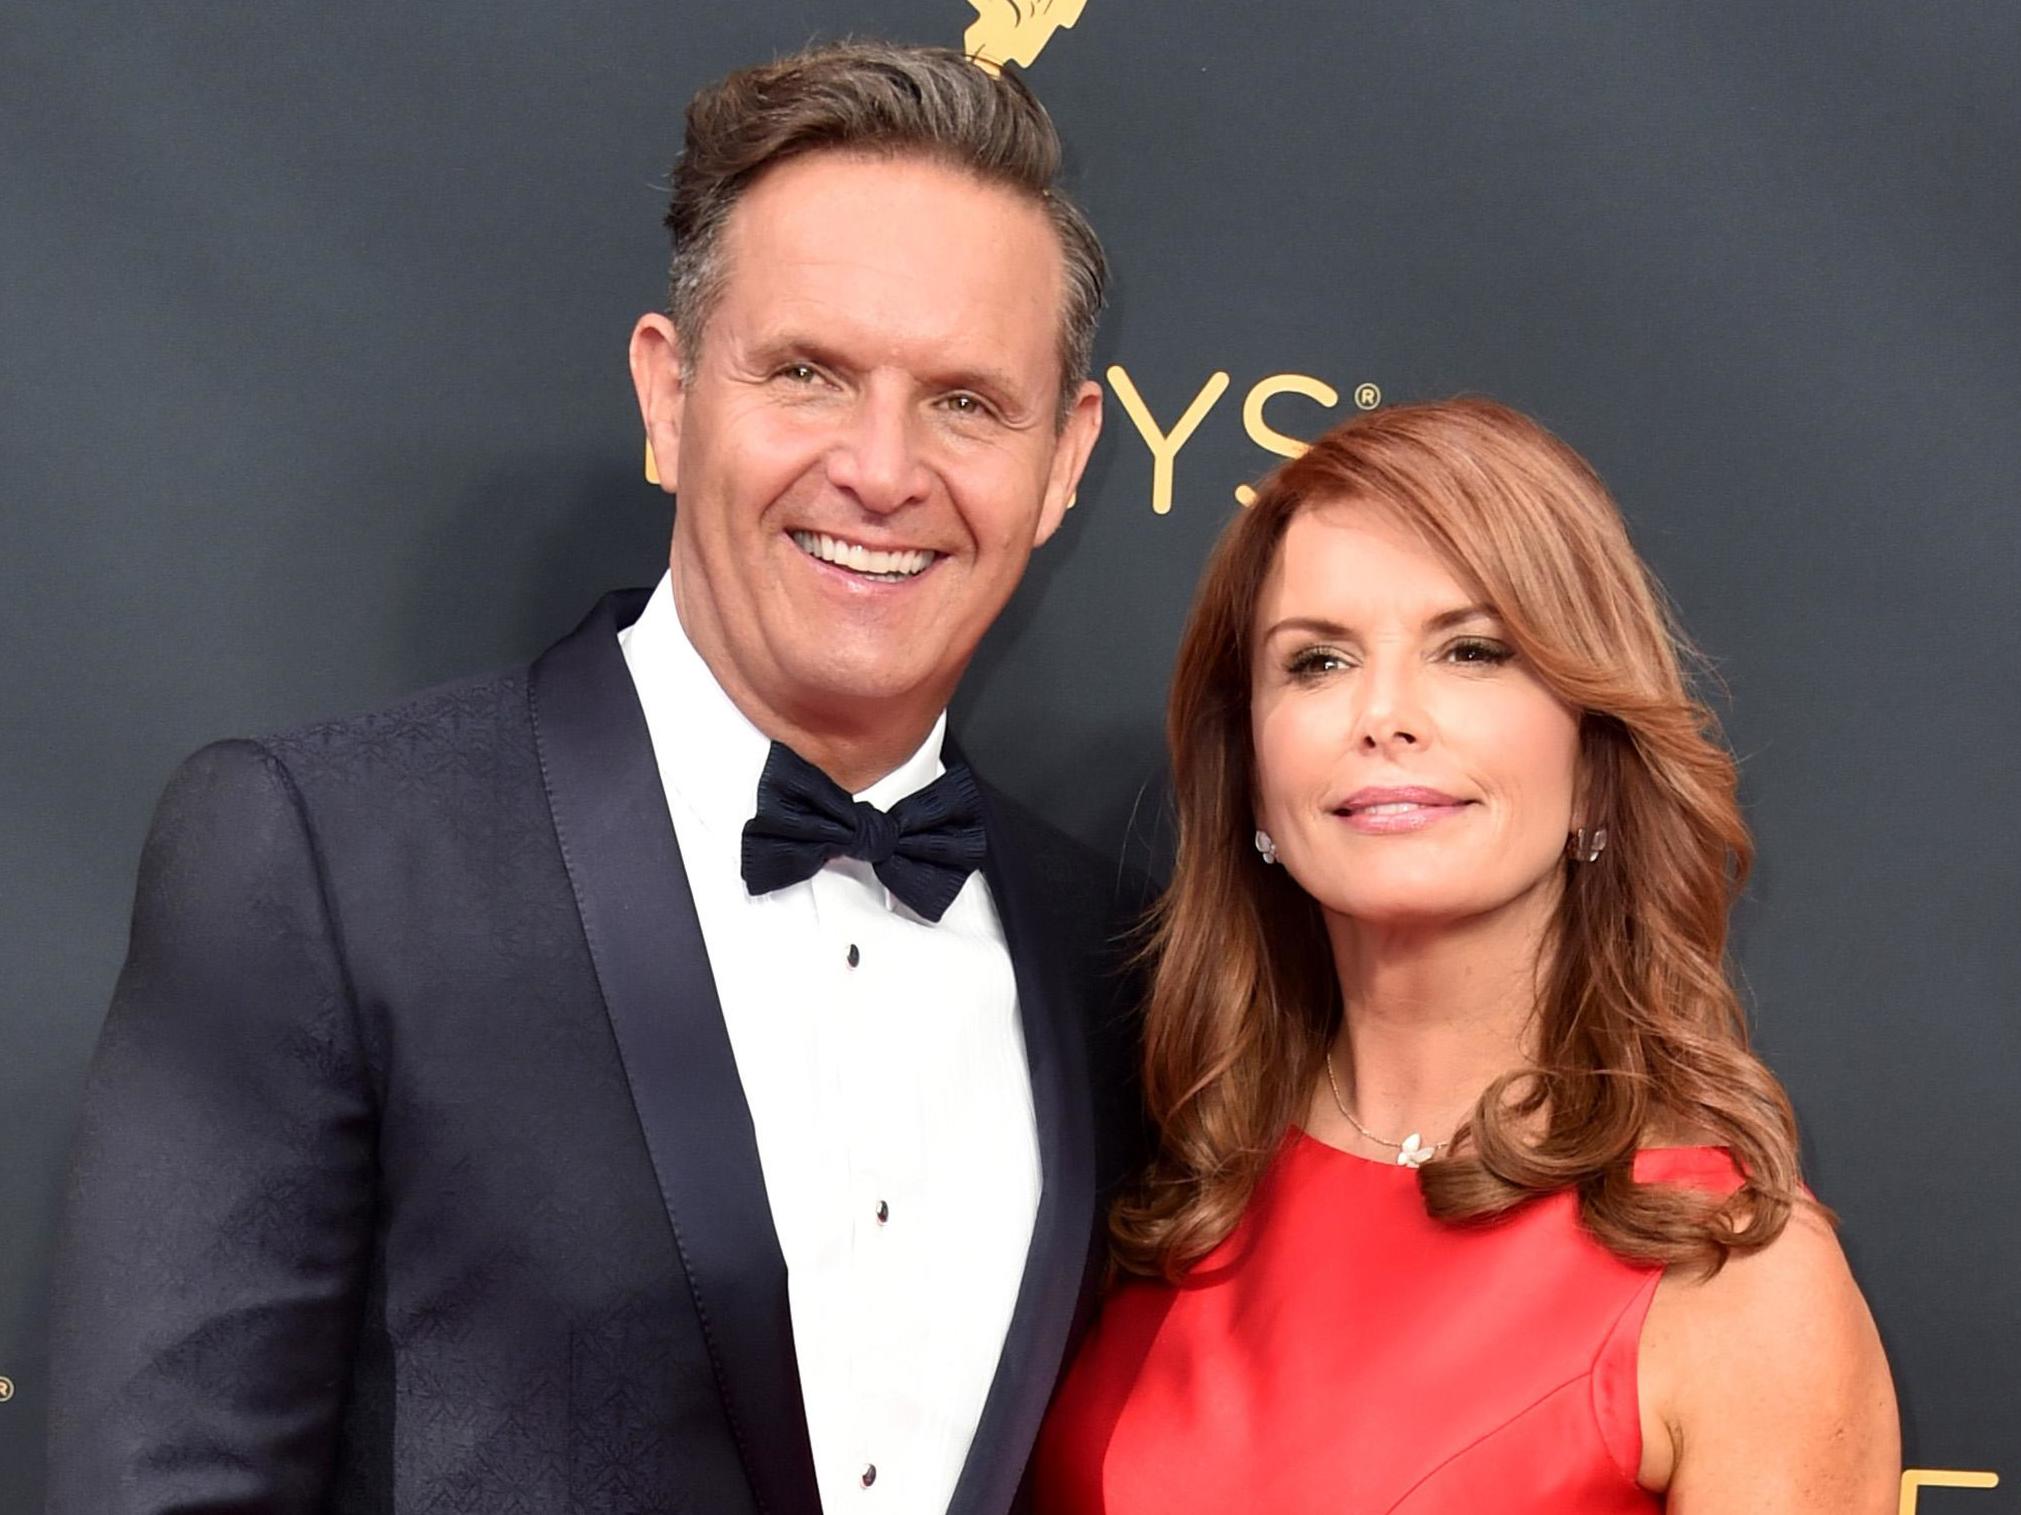 Mark Burnett and his wife Roma Downey at the 2016 Emmy Awards